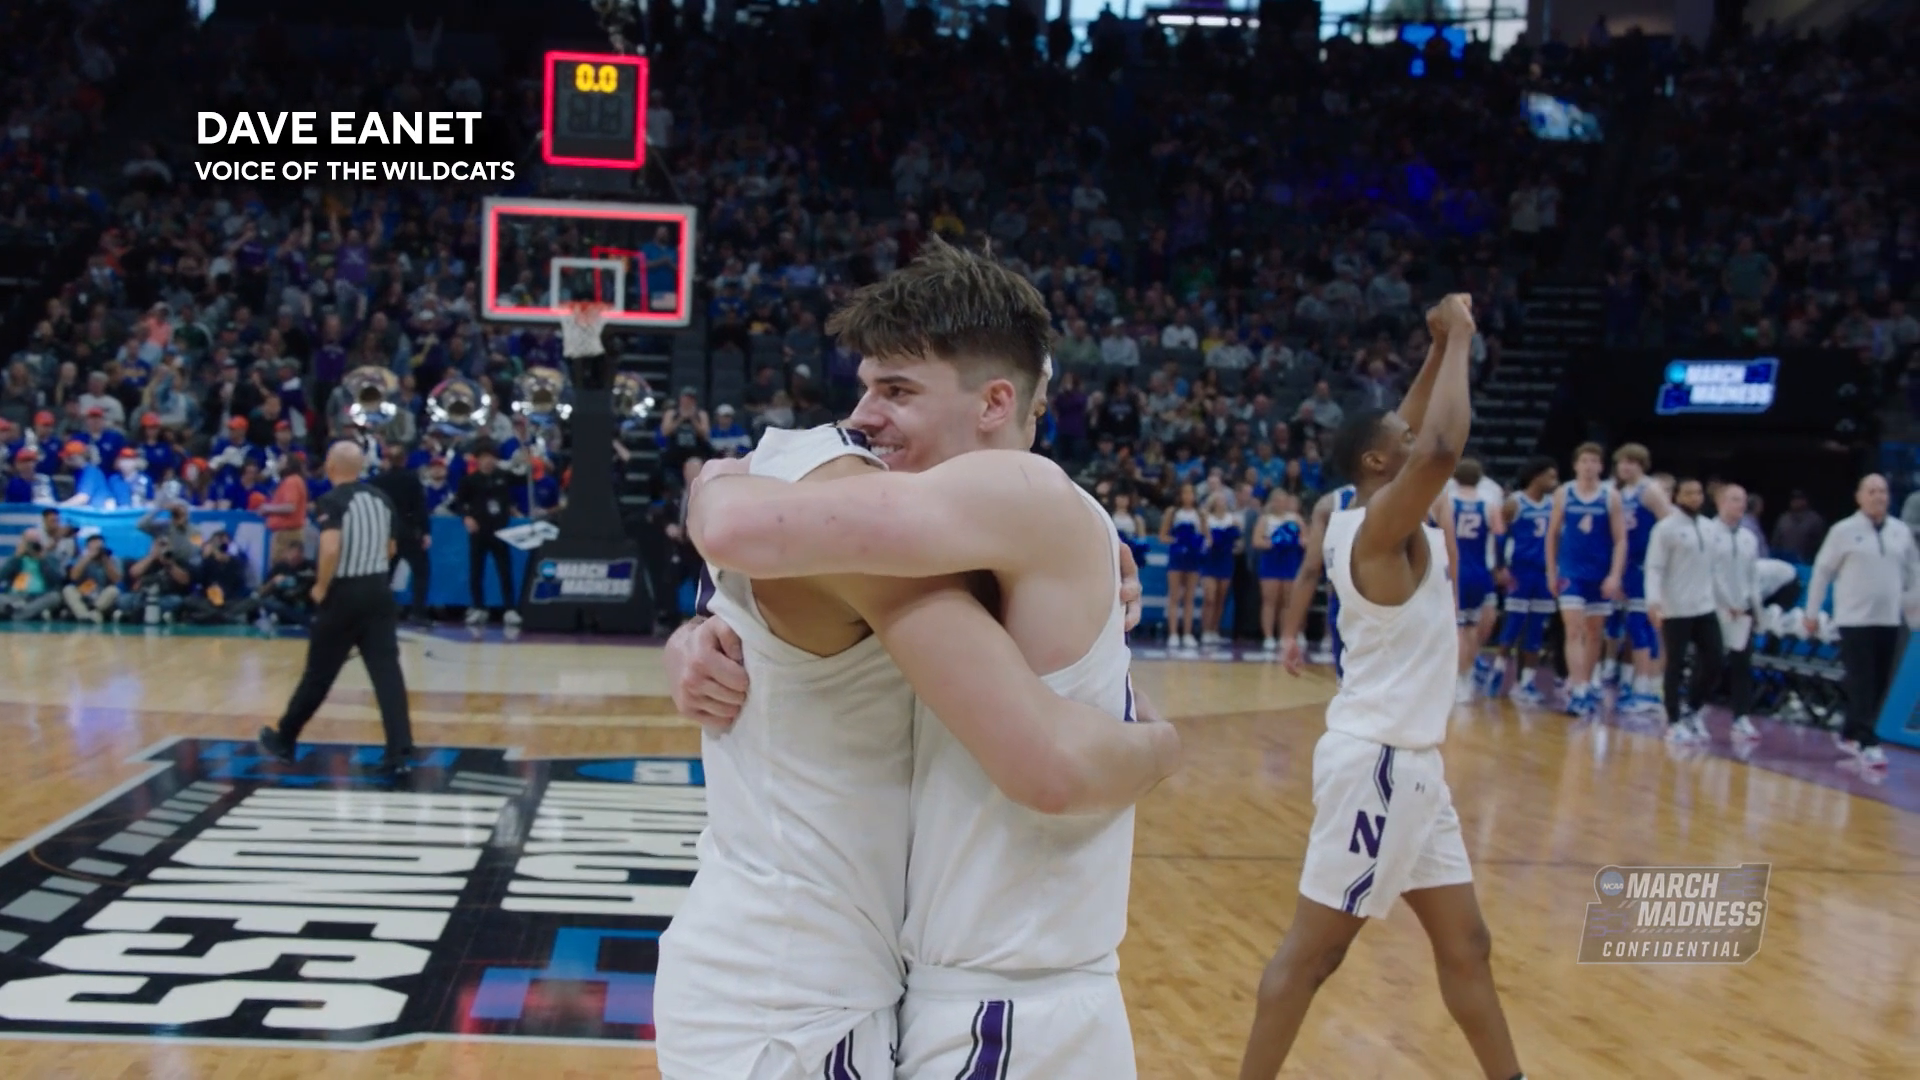 Northwestern punched their ticket to the NCAA Tournament for the third time